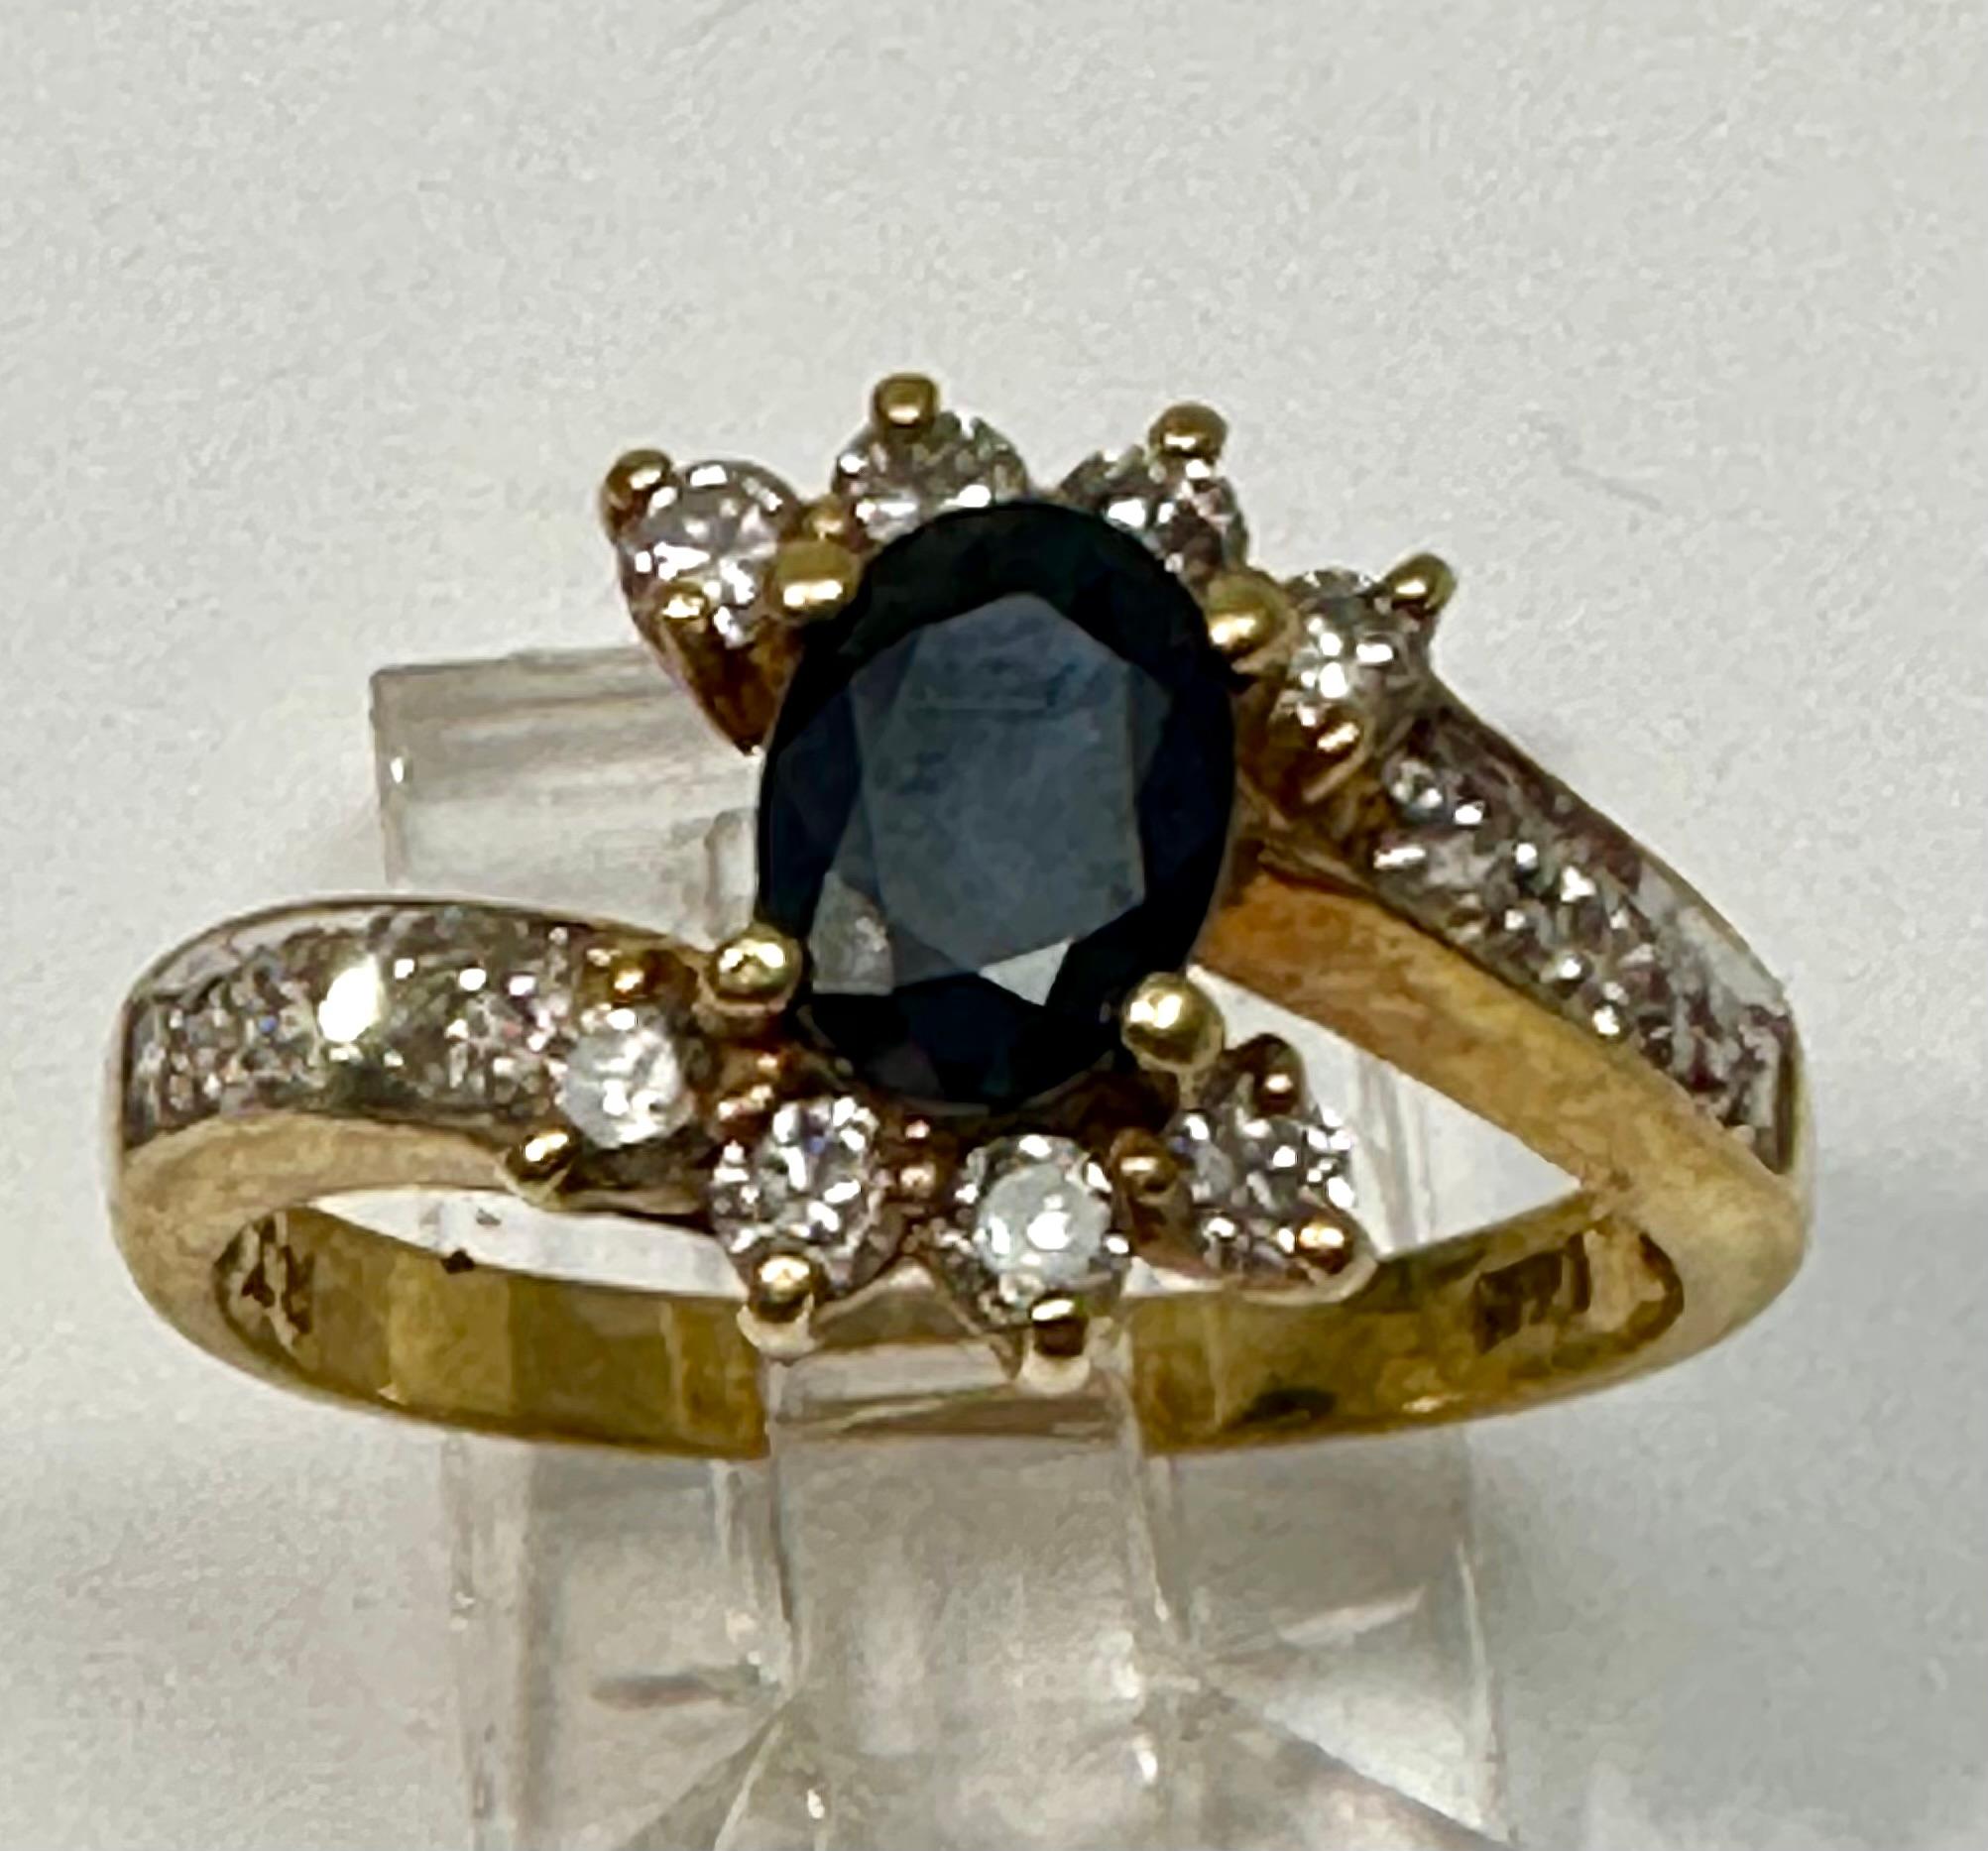 14k Yellow Gold ~ 5mm x 8mm Oval Sapphire ~ 14 Diamonds Ring ~ Size 7 1/4

Oval Sapphire measures 5mm x 7mm

Meaning: Sapphire is a stone of wisdom and royalty, often associated with sacred things and considered the gem of gems, guiding individuals